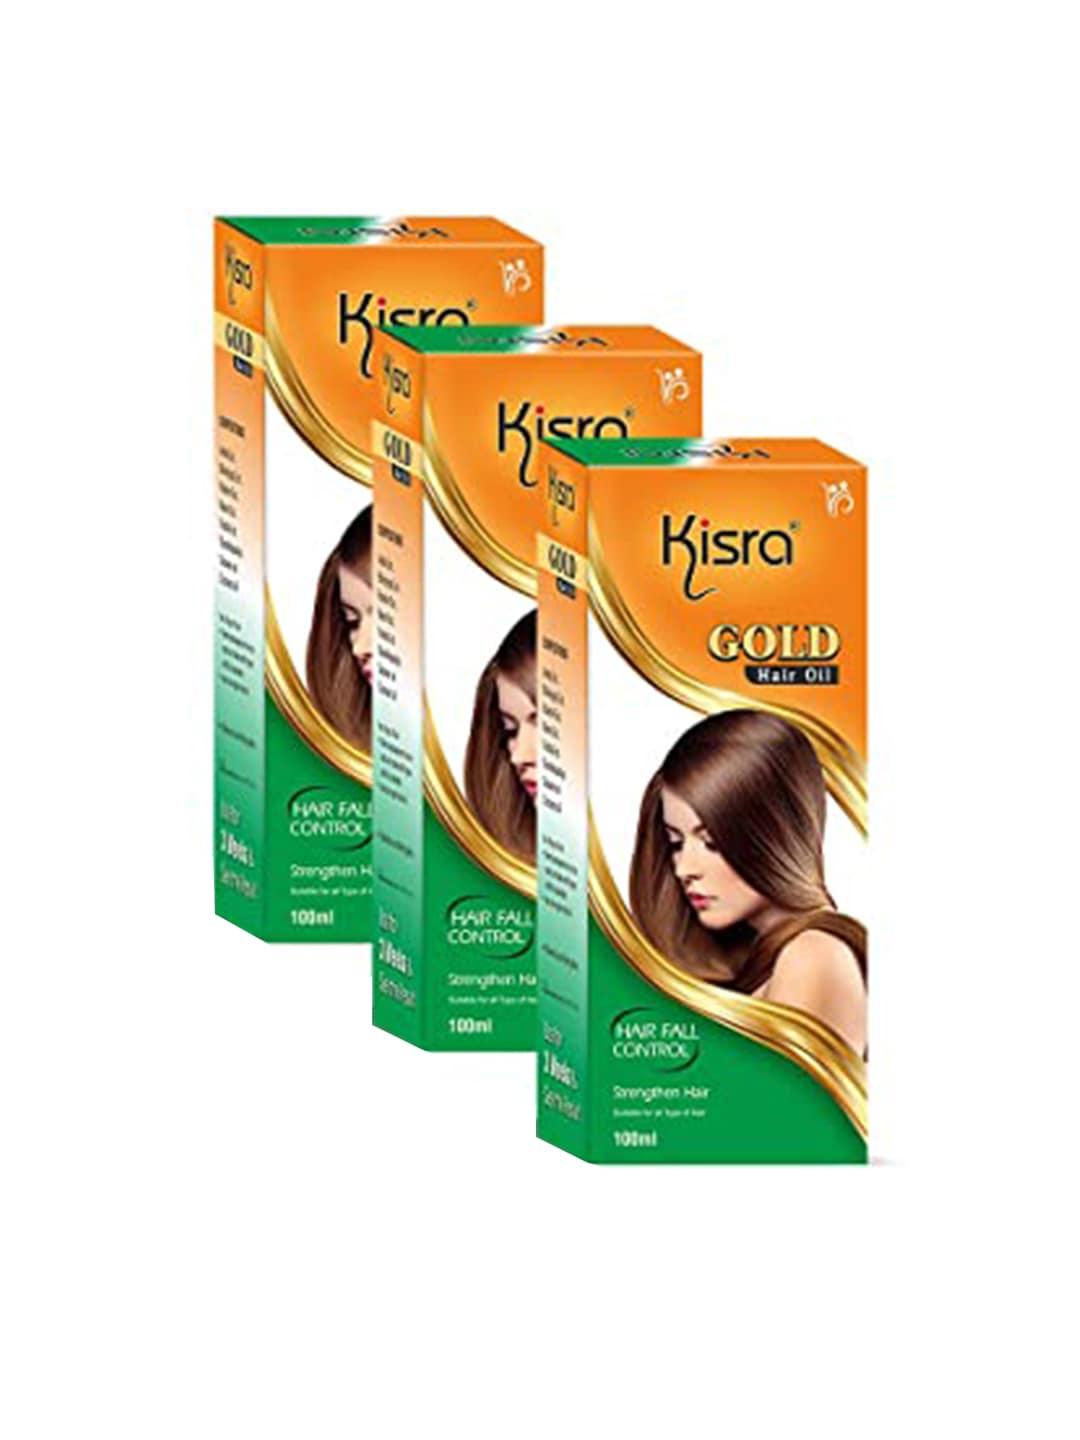 kisra-gold-set-of-3-hair-oils-for-frizz-control-&-hair-smoothening-100ml-each